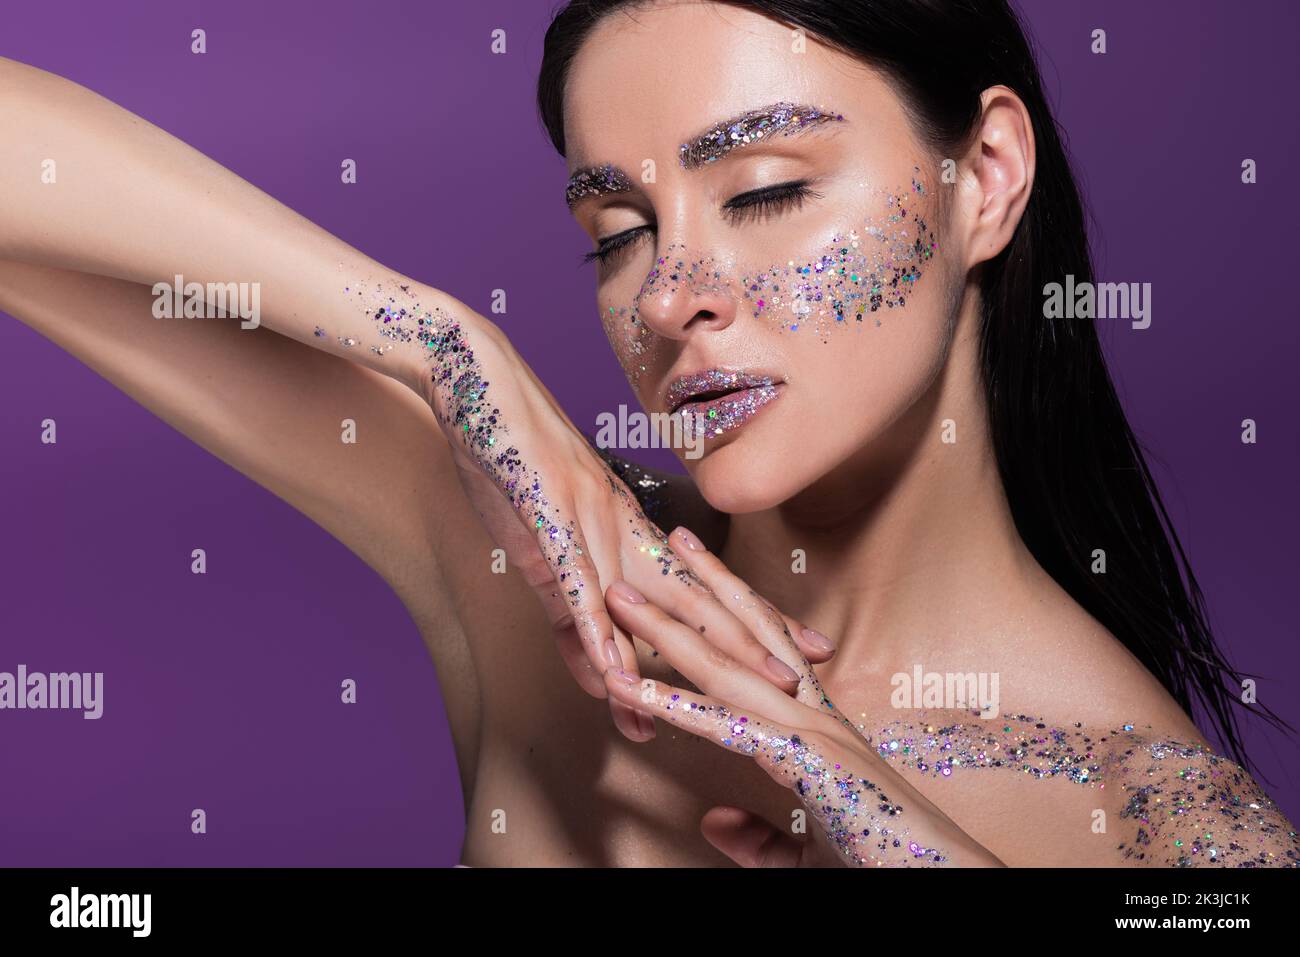 sensual woman with closed eyes and glitter on face posing isolated on purple,stock image Stock Photo